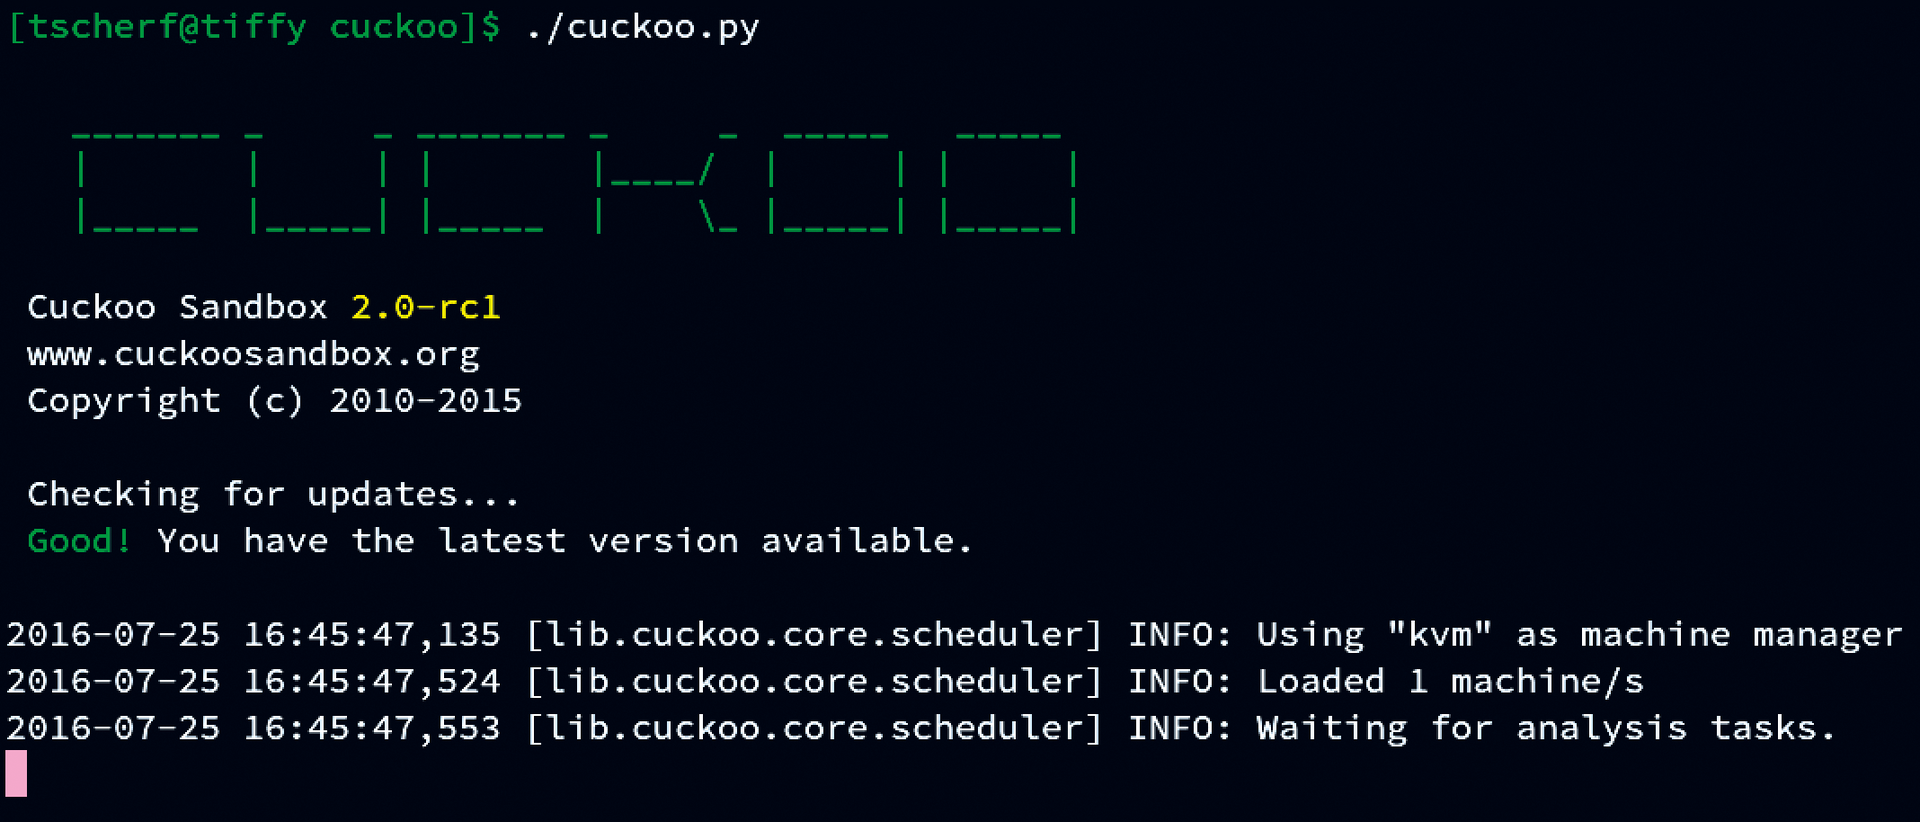 After the ASCII art welcome message, Cuckoo waits for incoming malware analysis jobs. 